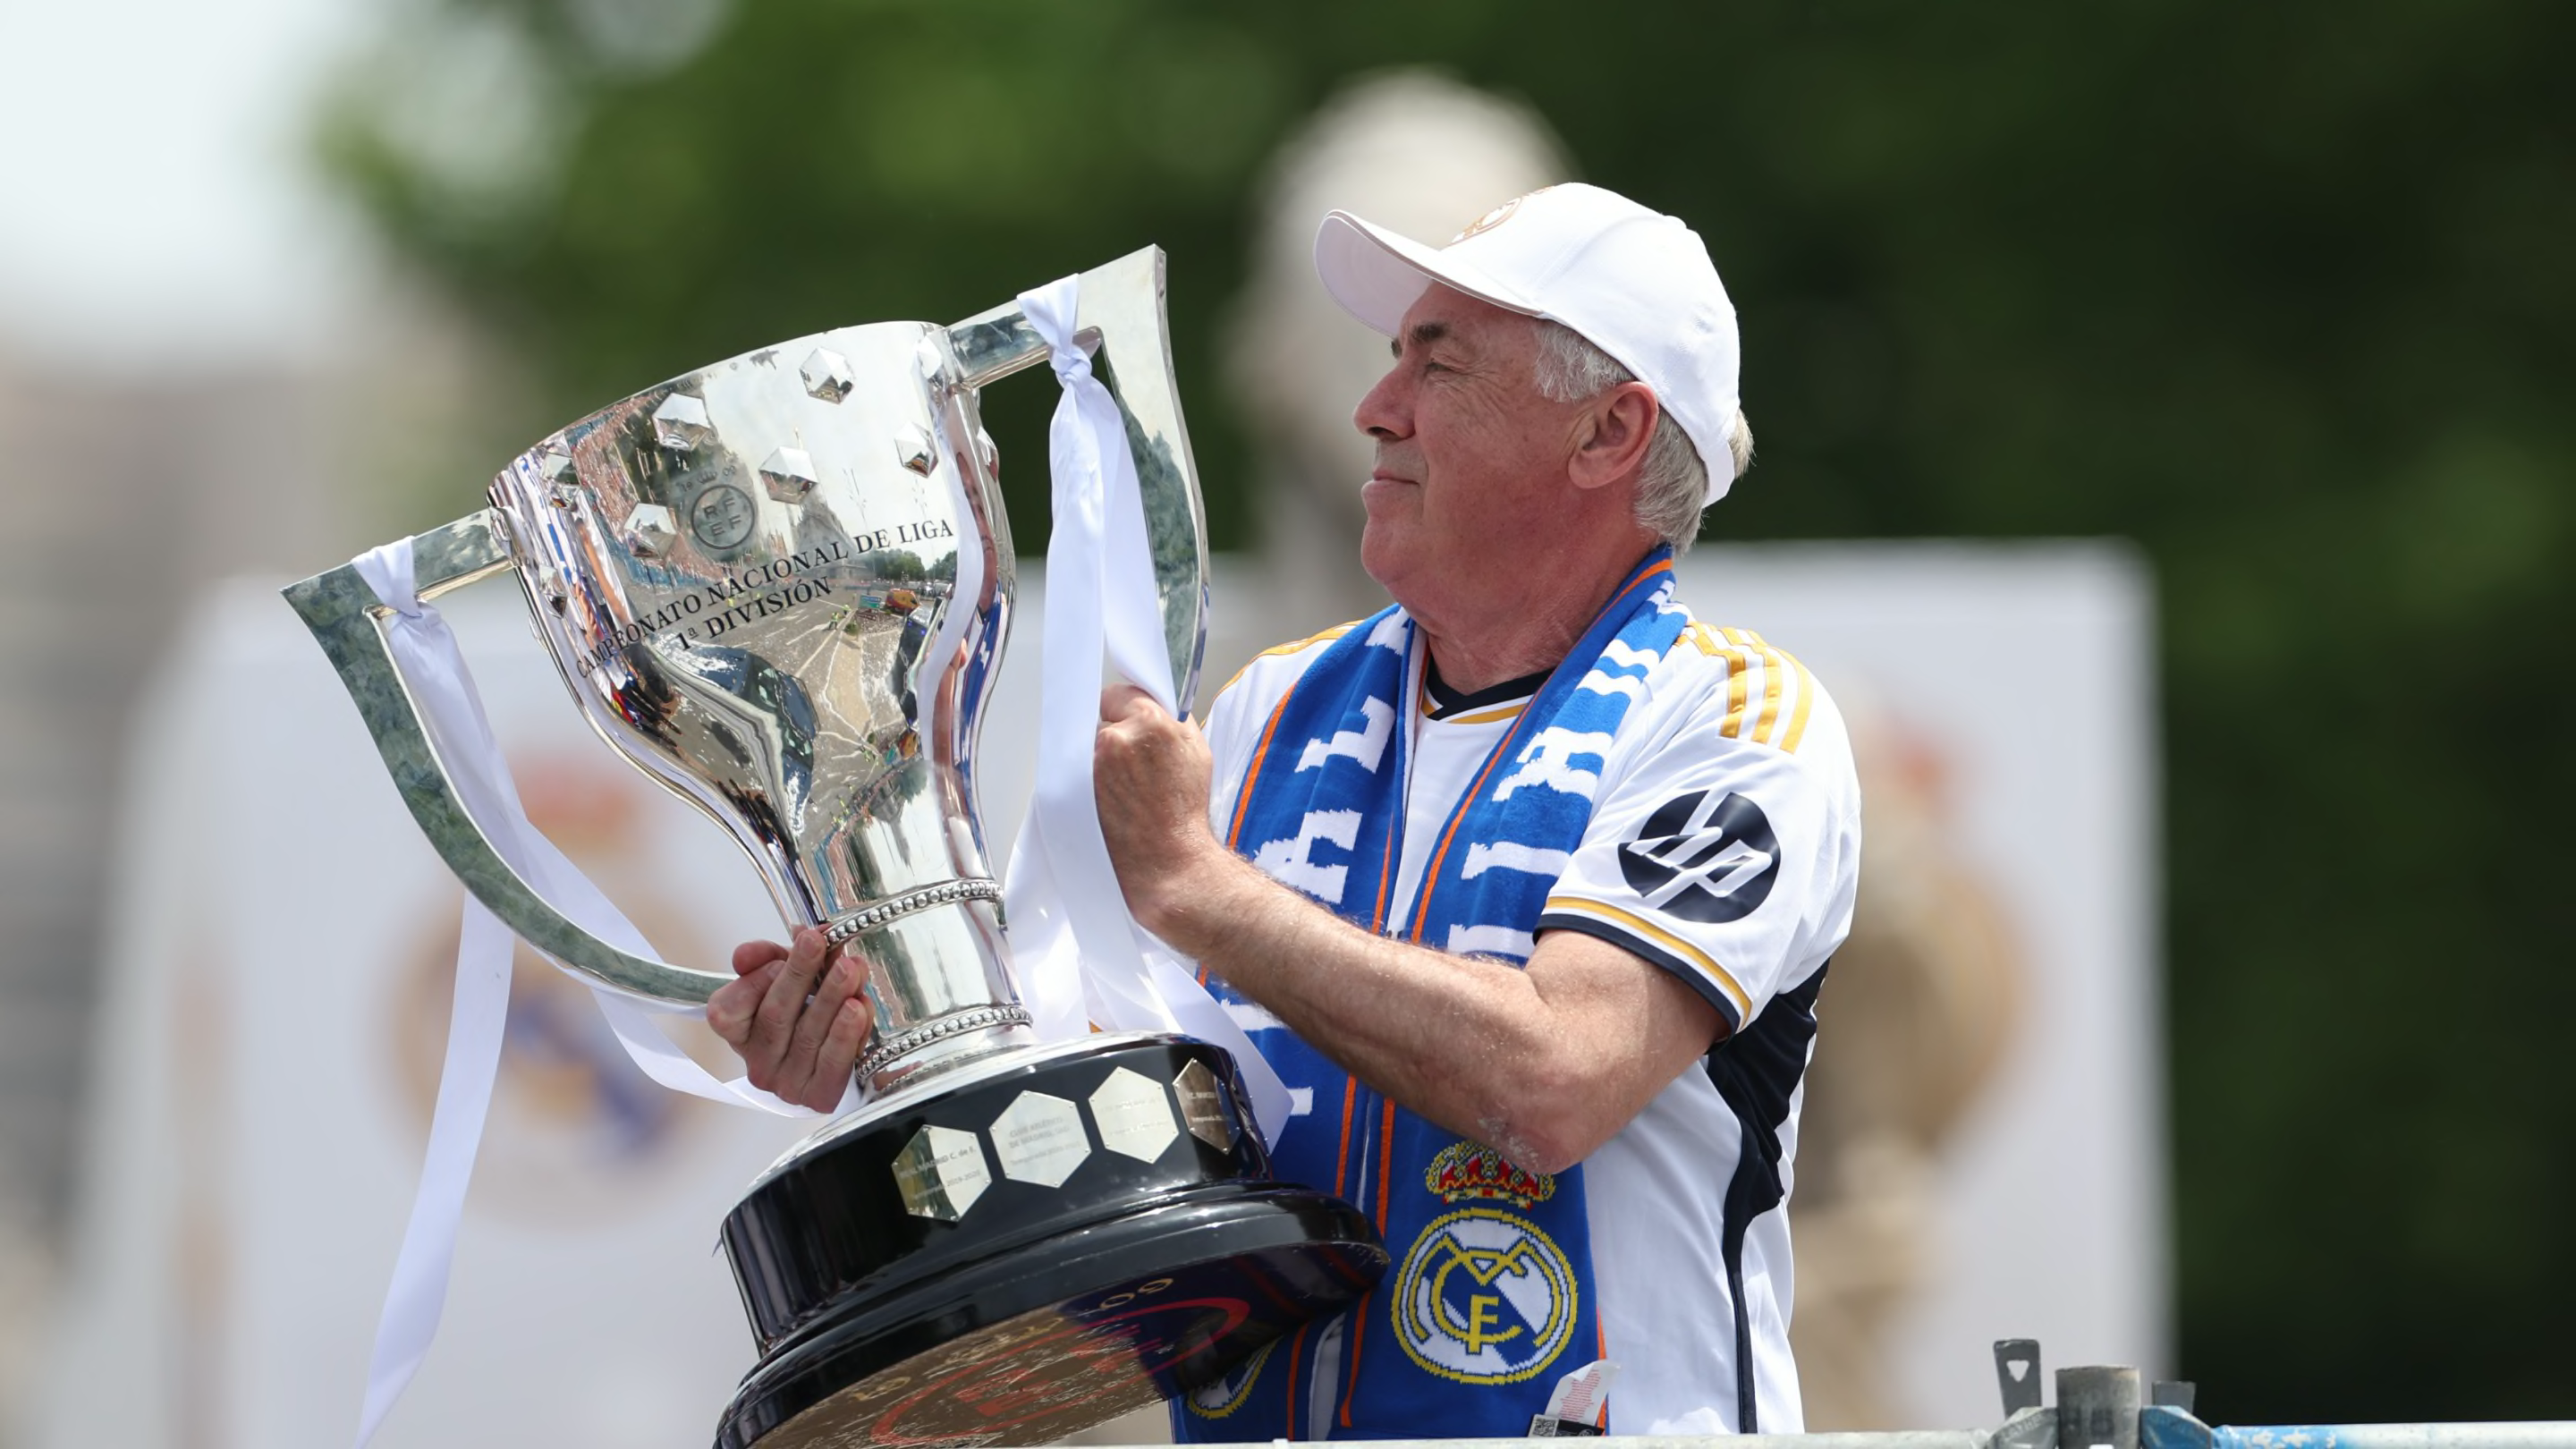 Carlo Ancelotti recreates famous 'Don Carlo' picture at Real Madrid title parade